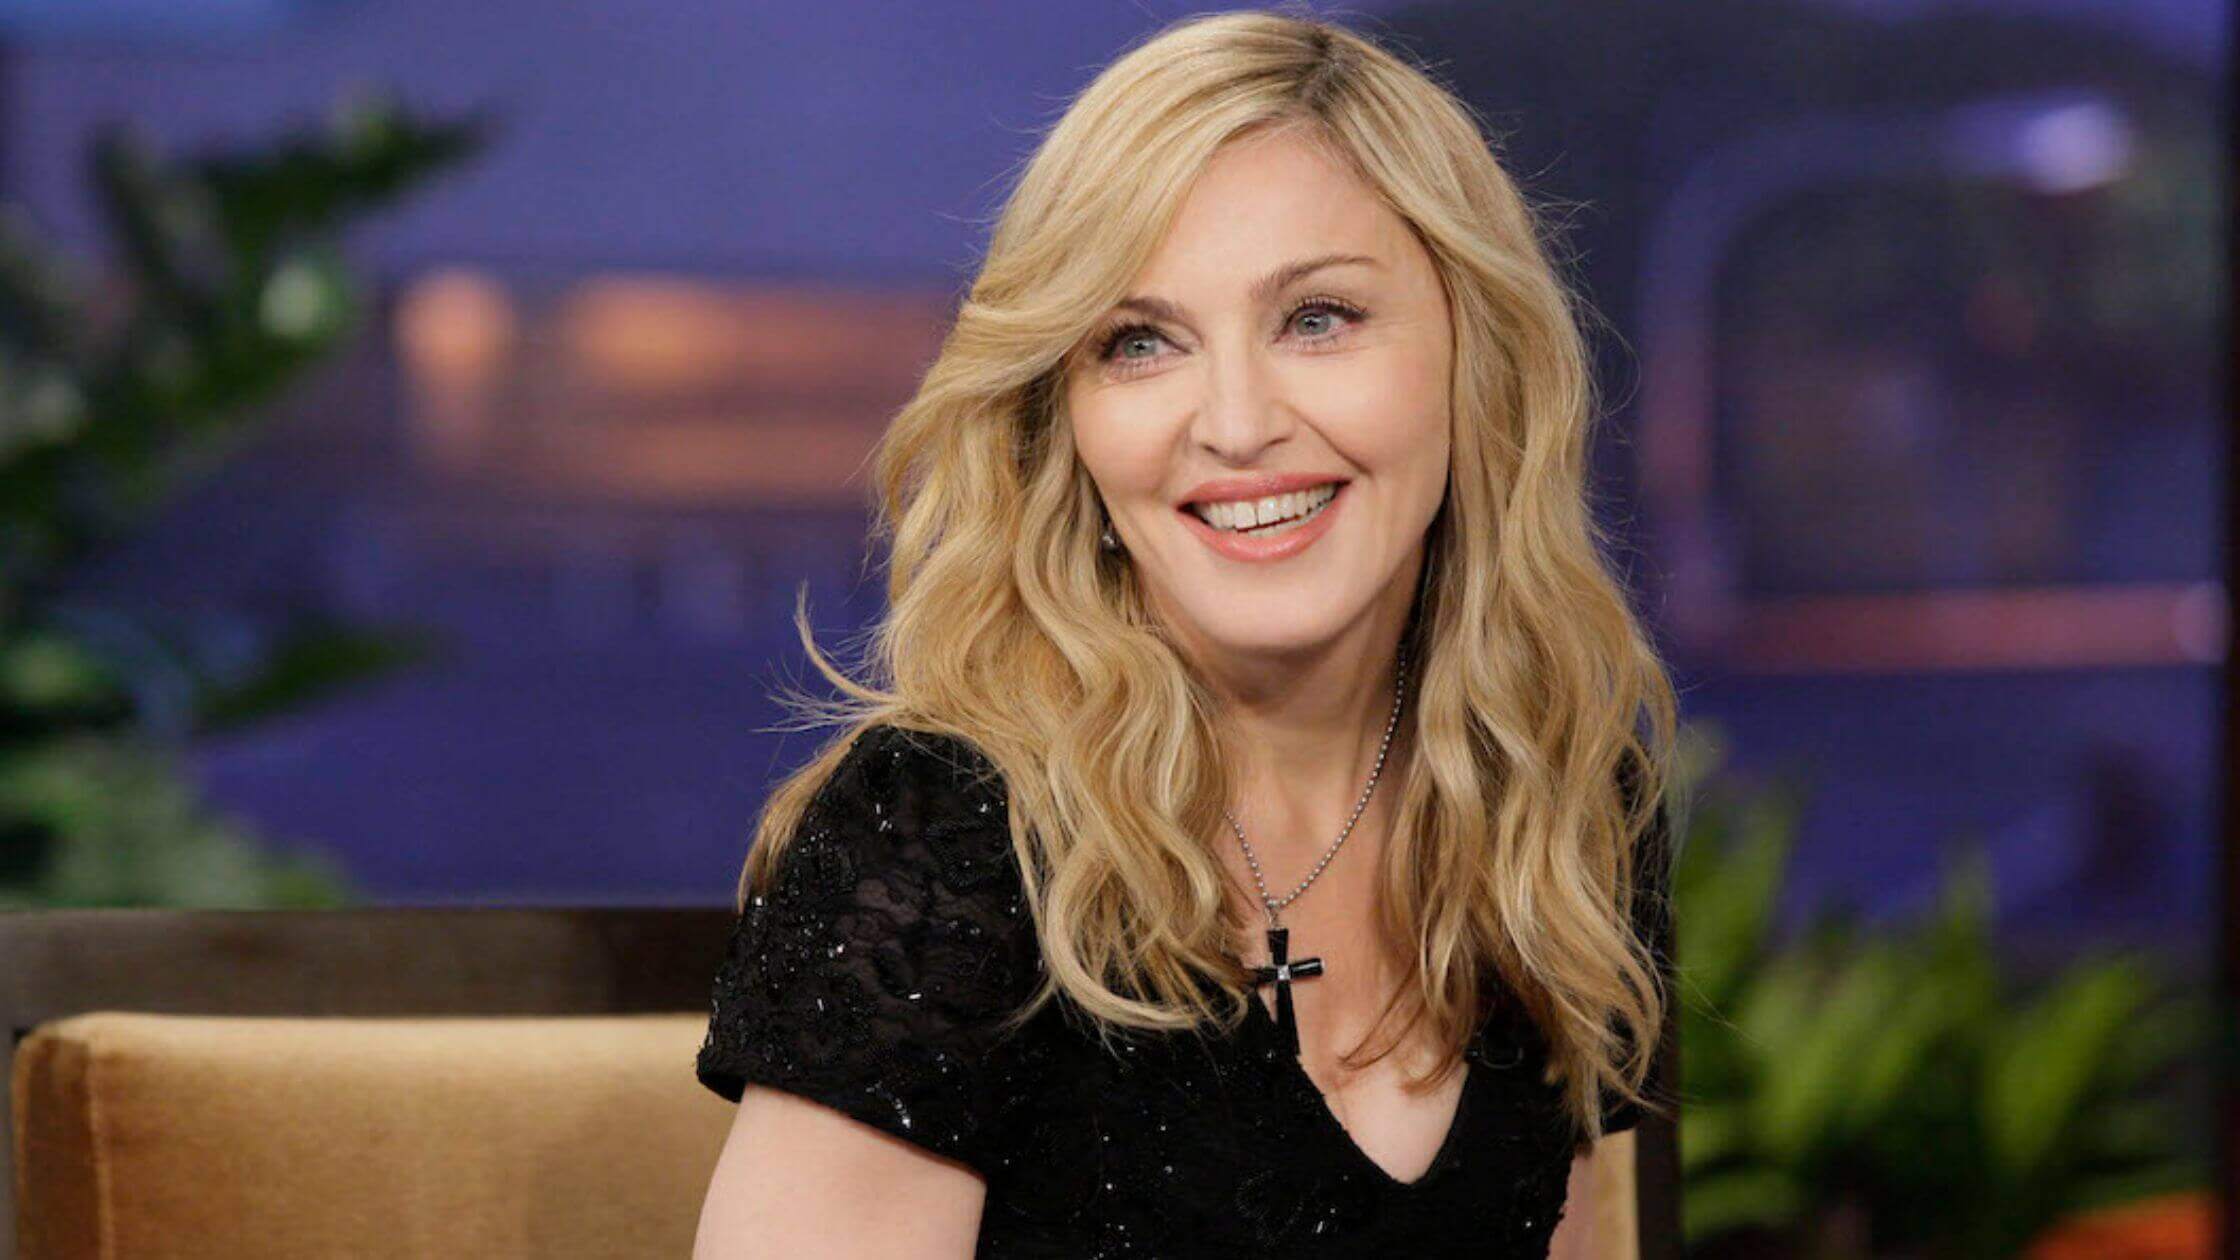 Madonna, 63, Looks Stunning In A Low-cut Dress For Family Game Night